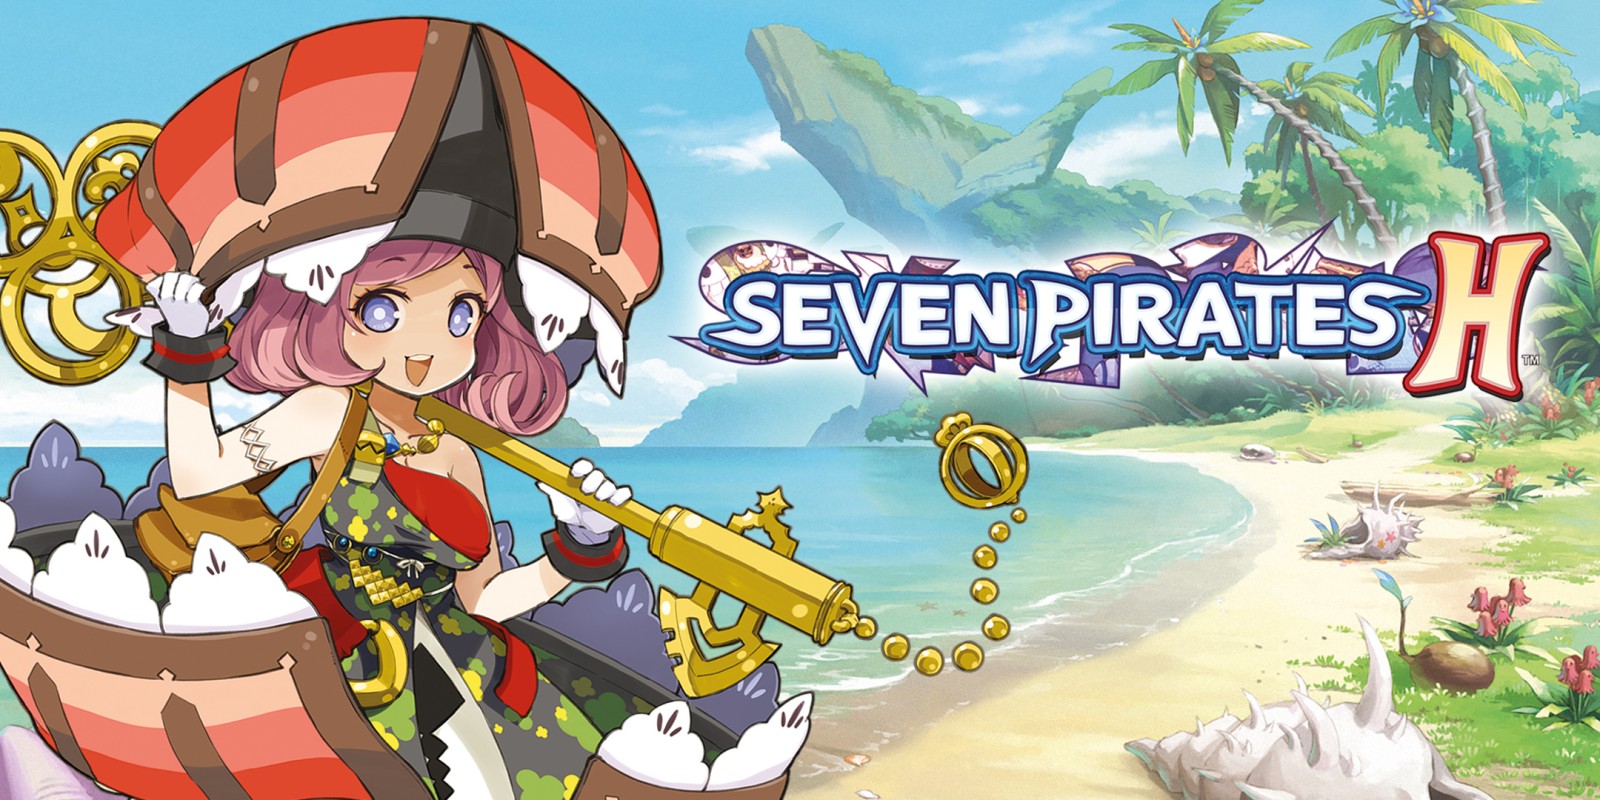 Seven Pirates H Review